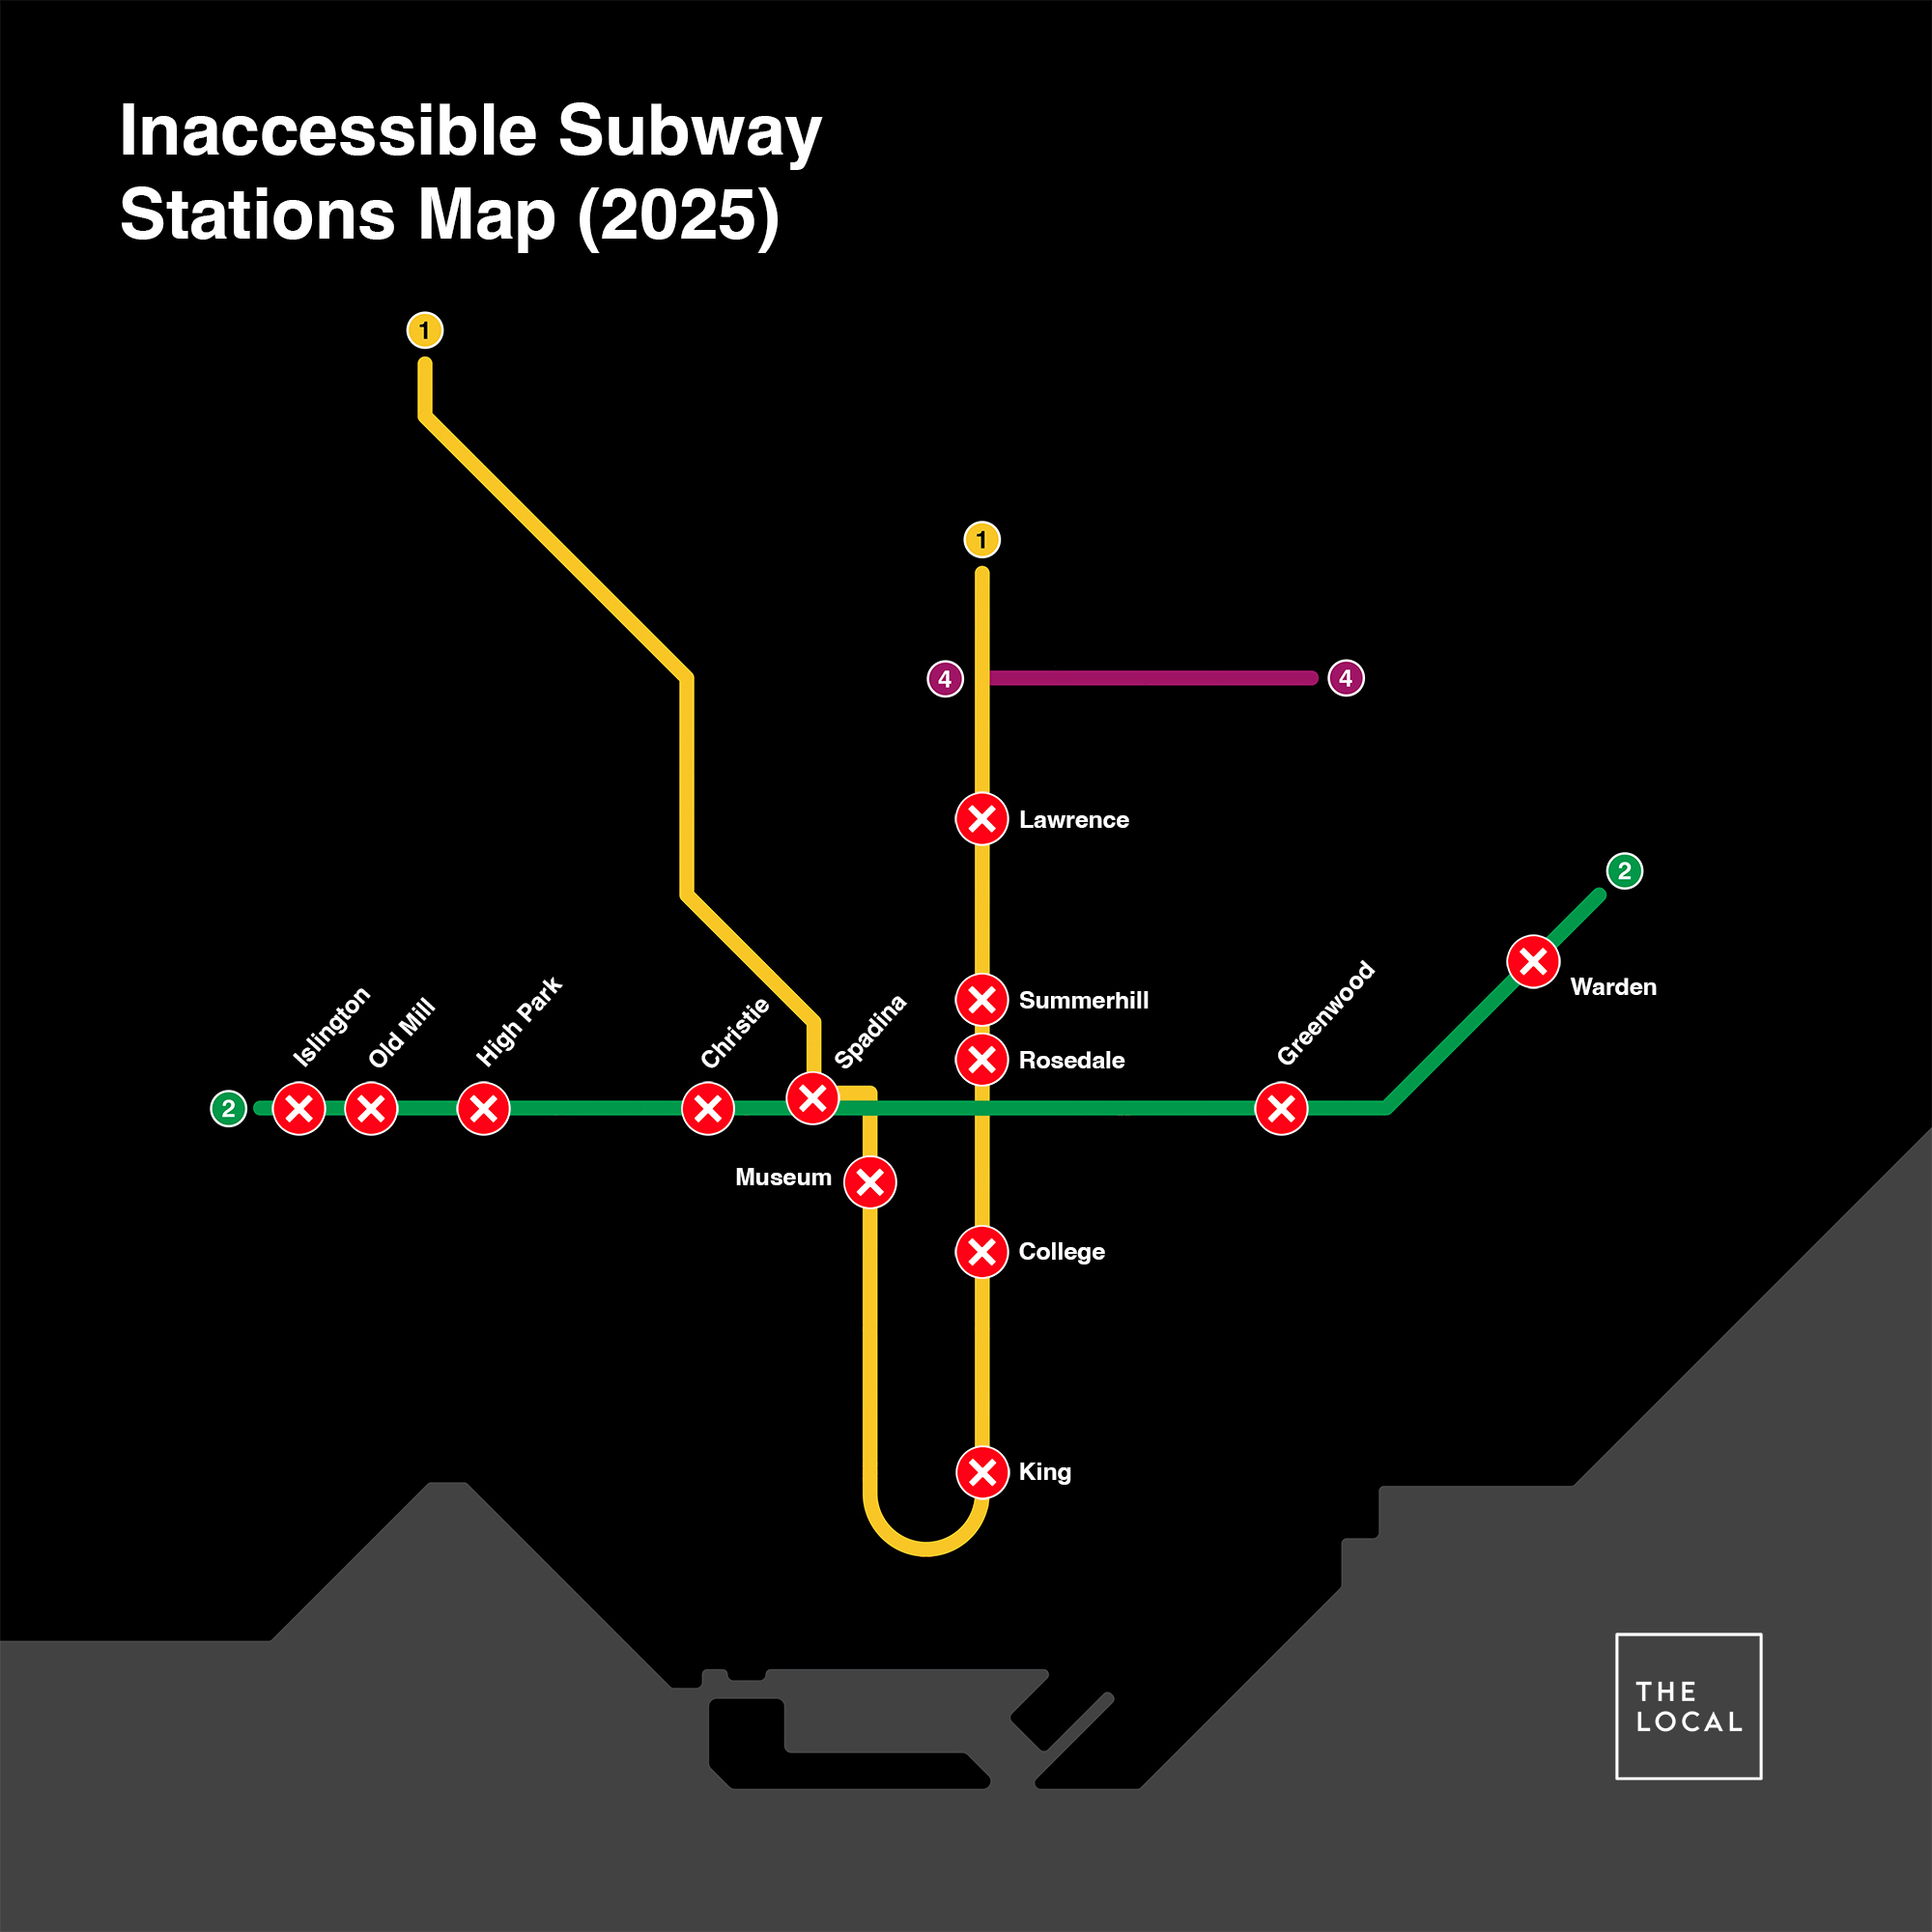 Inaccessible TTC subway stations map, showing the 13 stations that will not be AODA compliant by 2025: Islington, Old Mill, High Park, Christie, Spadina, Greenwood, Warden, King, College, Rosedale, Summerhill, Lawrence.